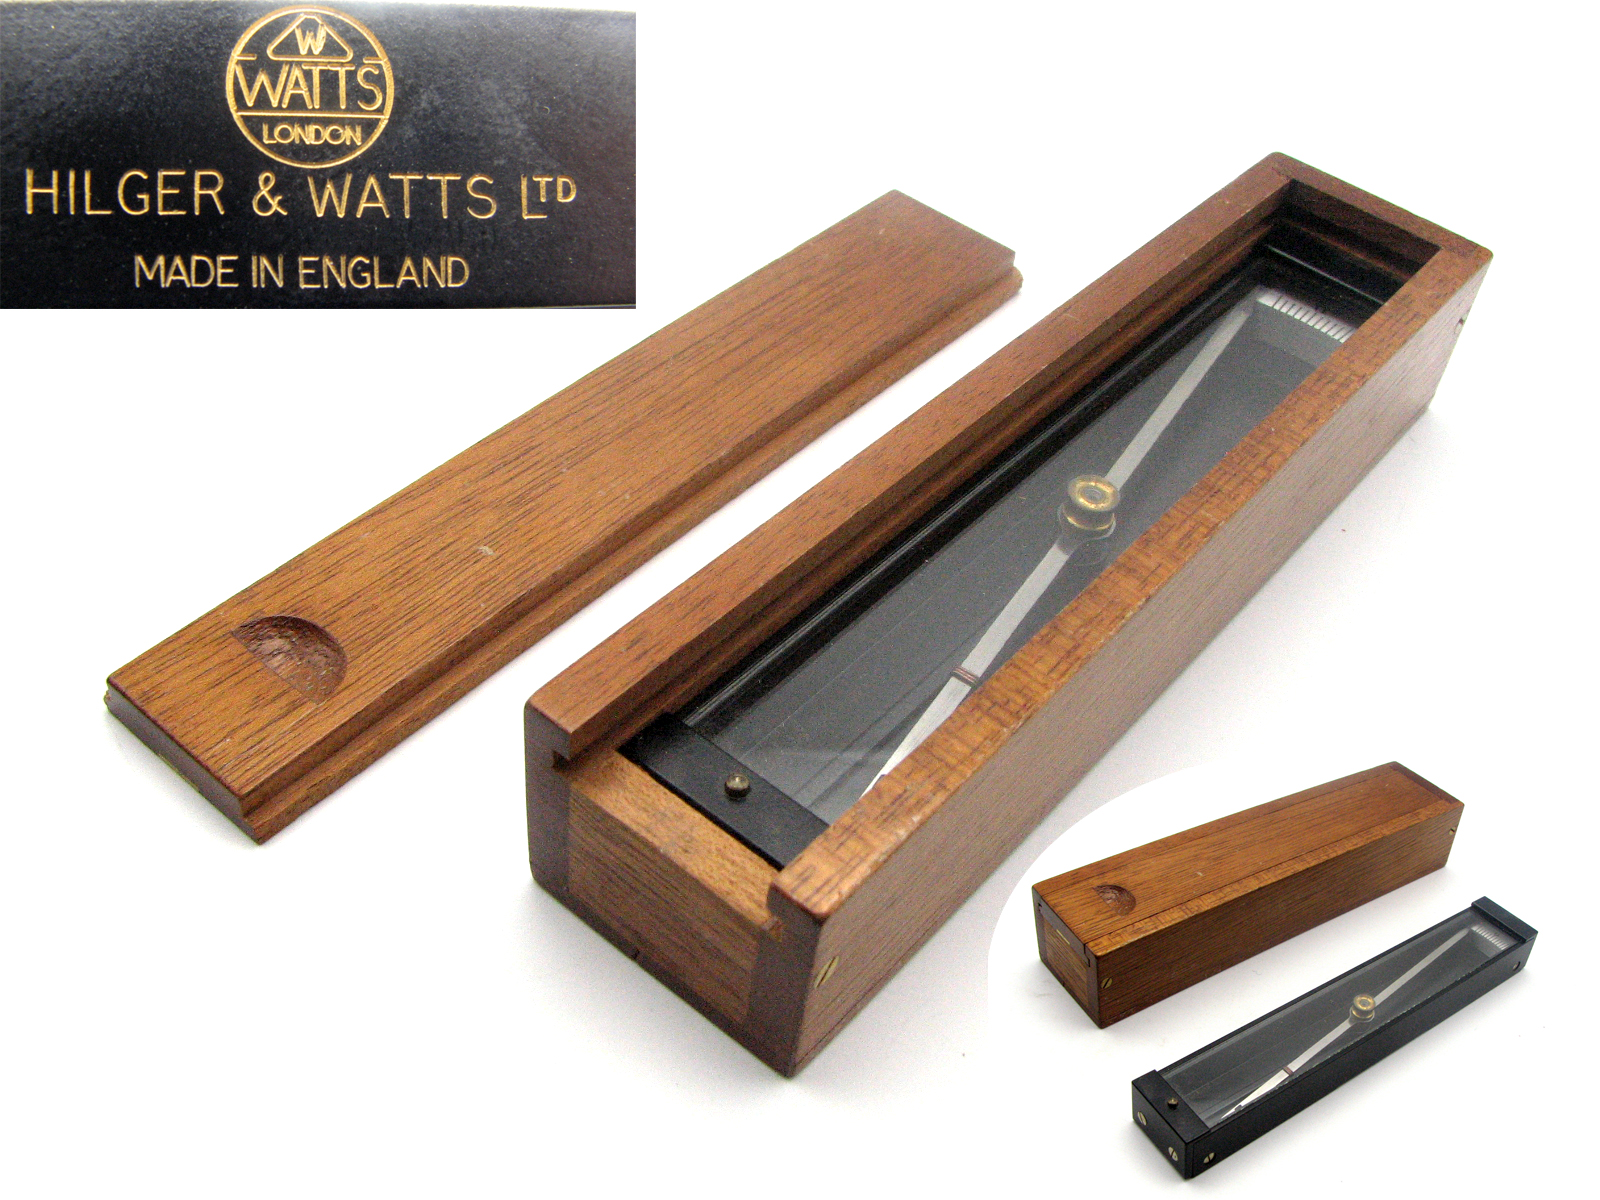 Hilger & Watts plane table trough compass in mahogany case